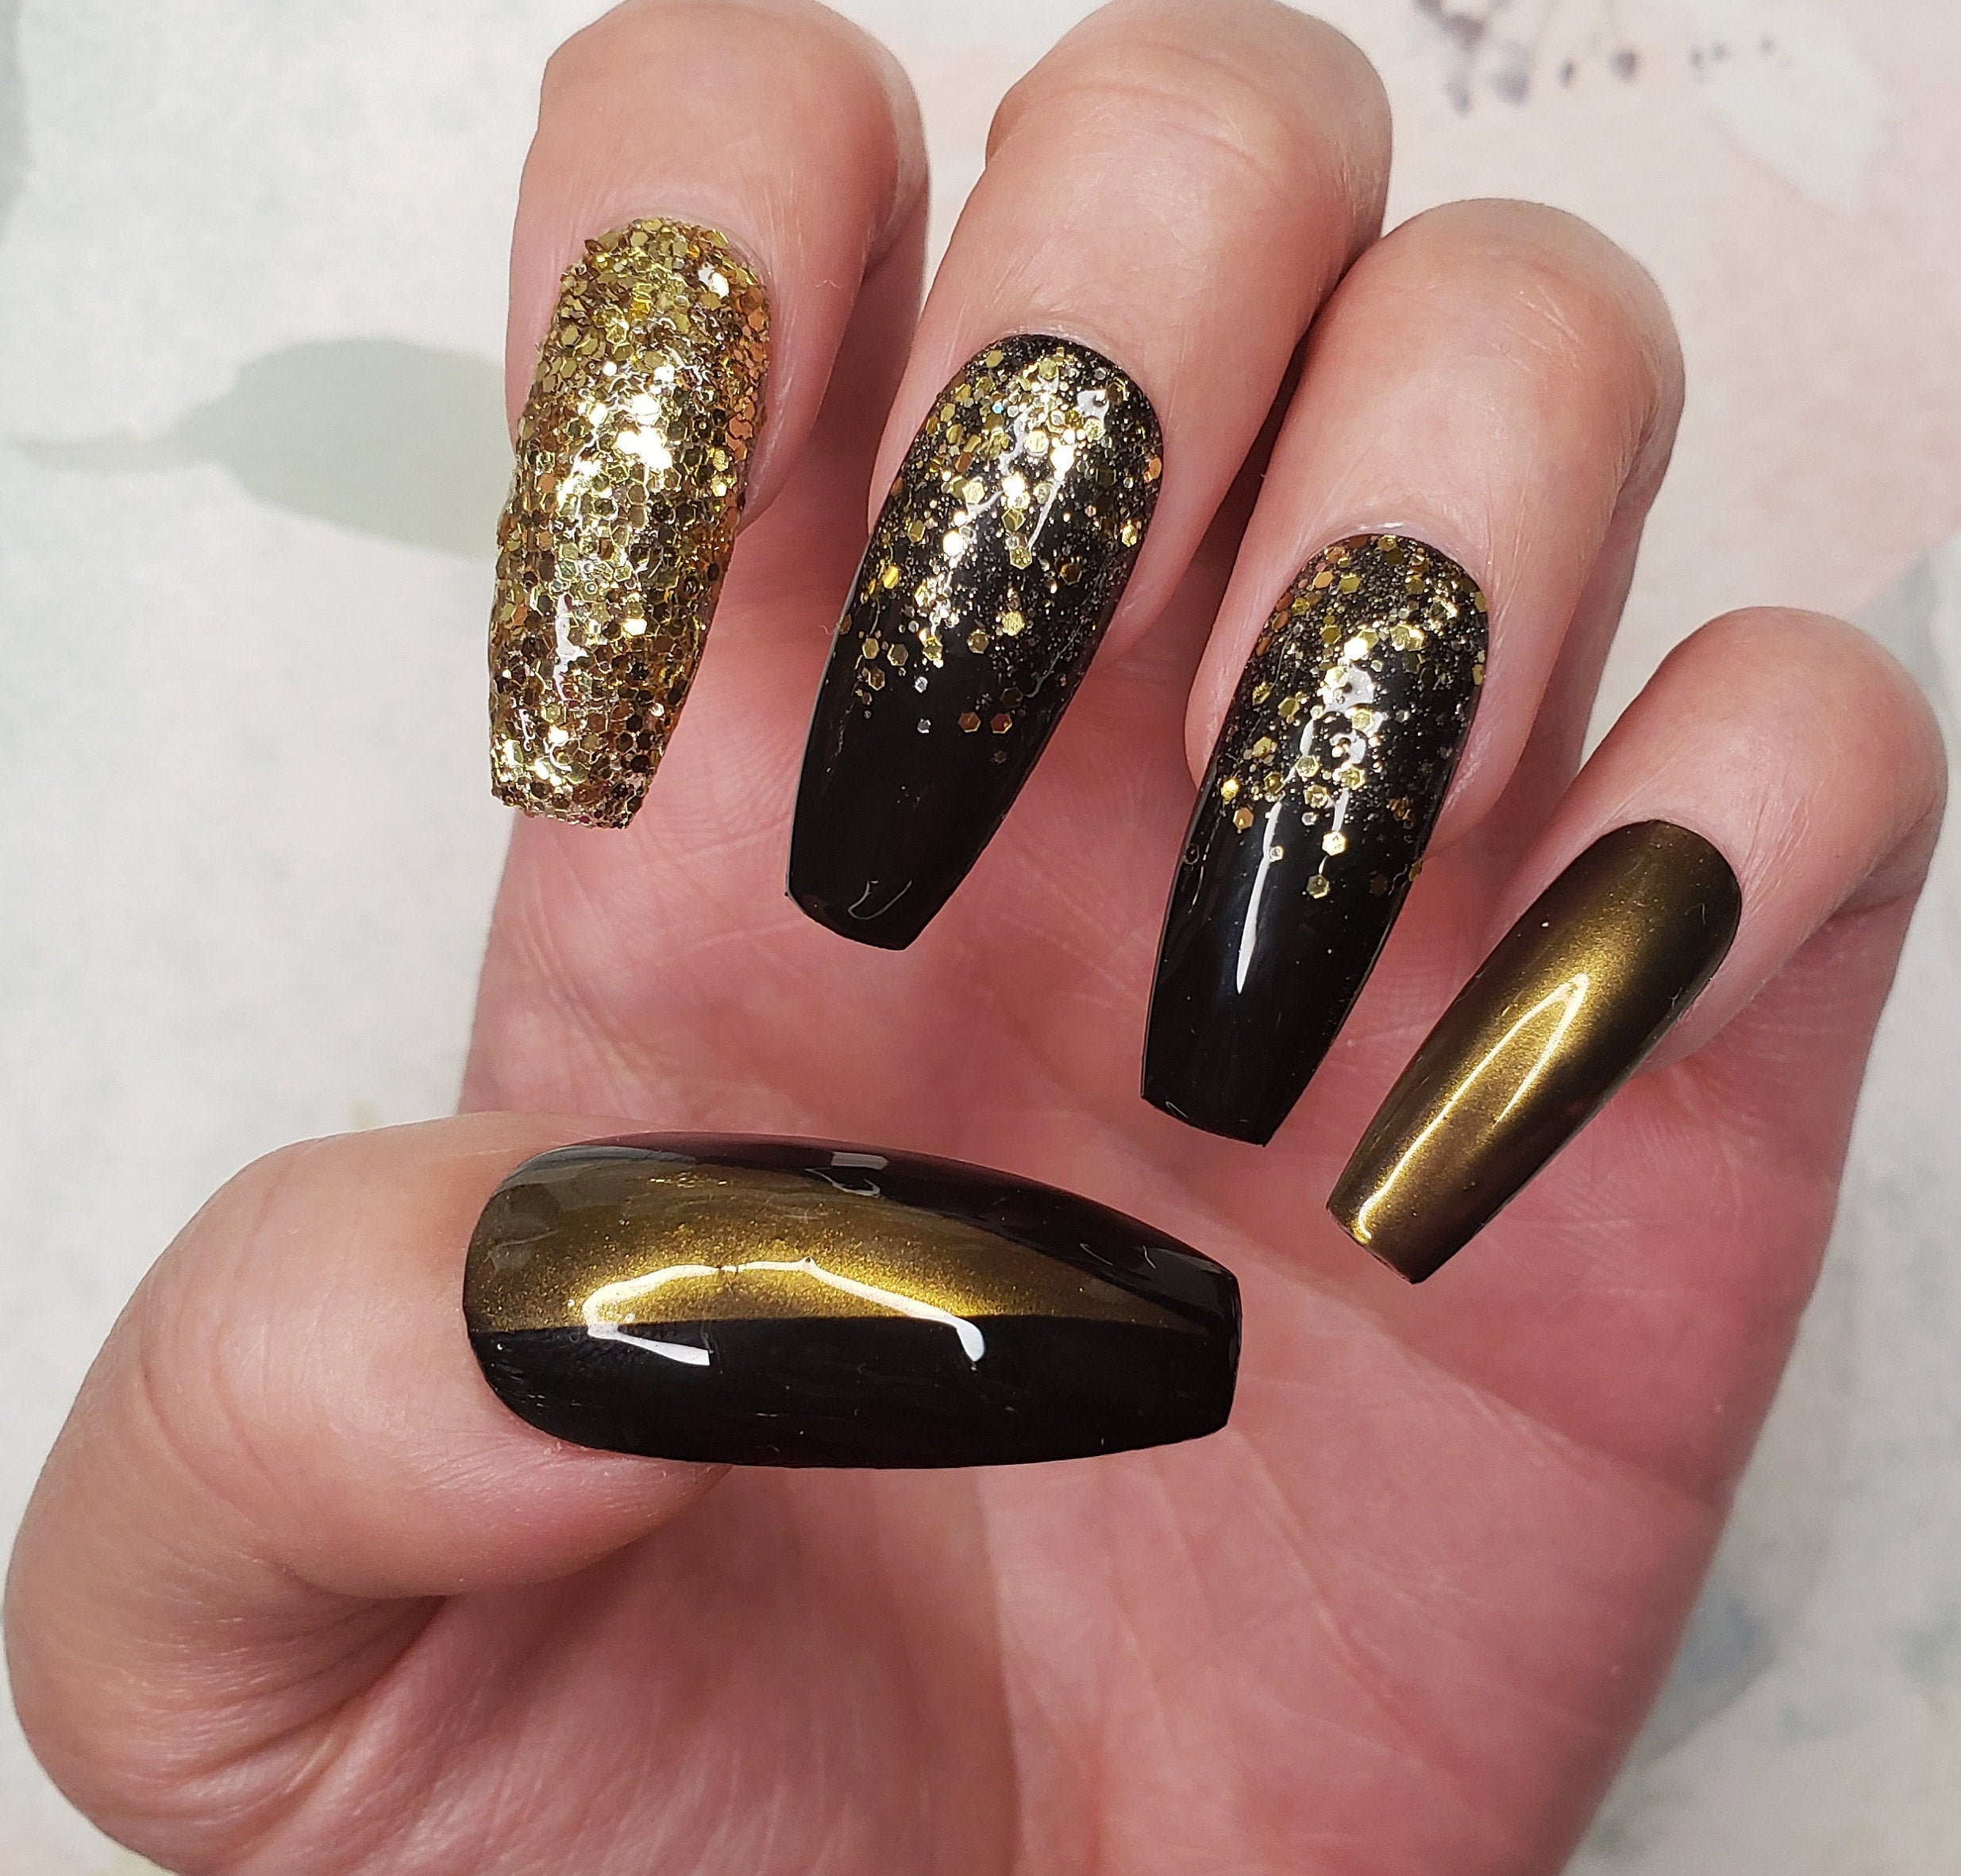 Party Gold Chrome and Glitter New Years Holiday Gel Nail Art - Etsy UK